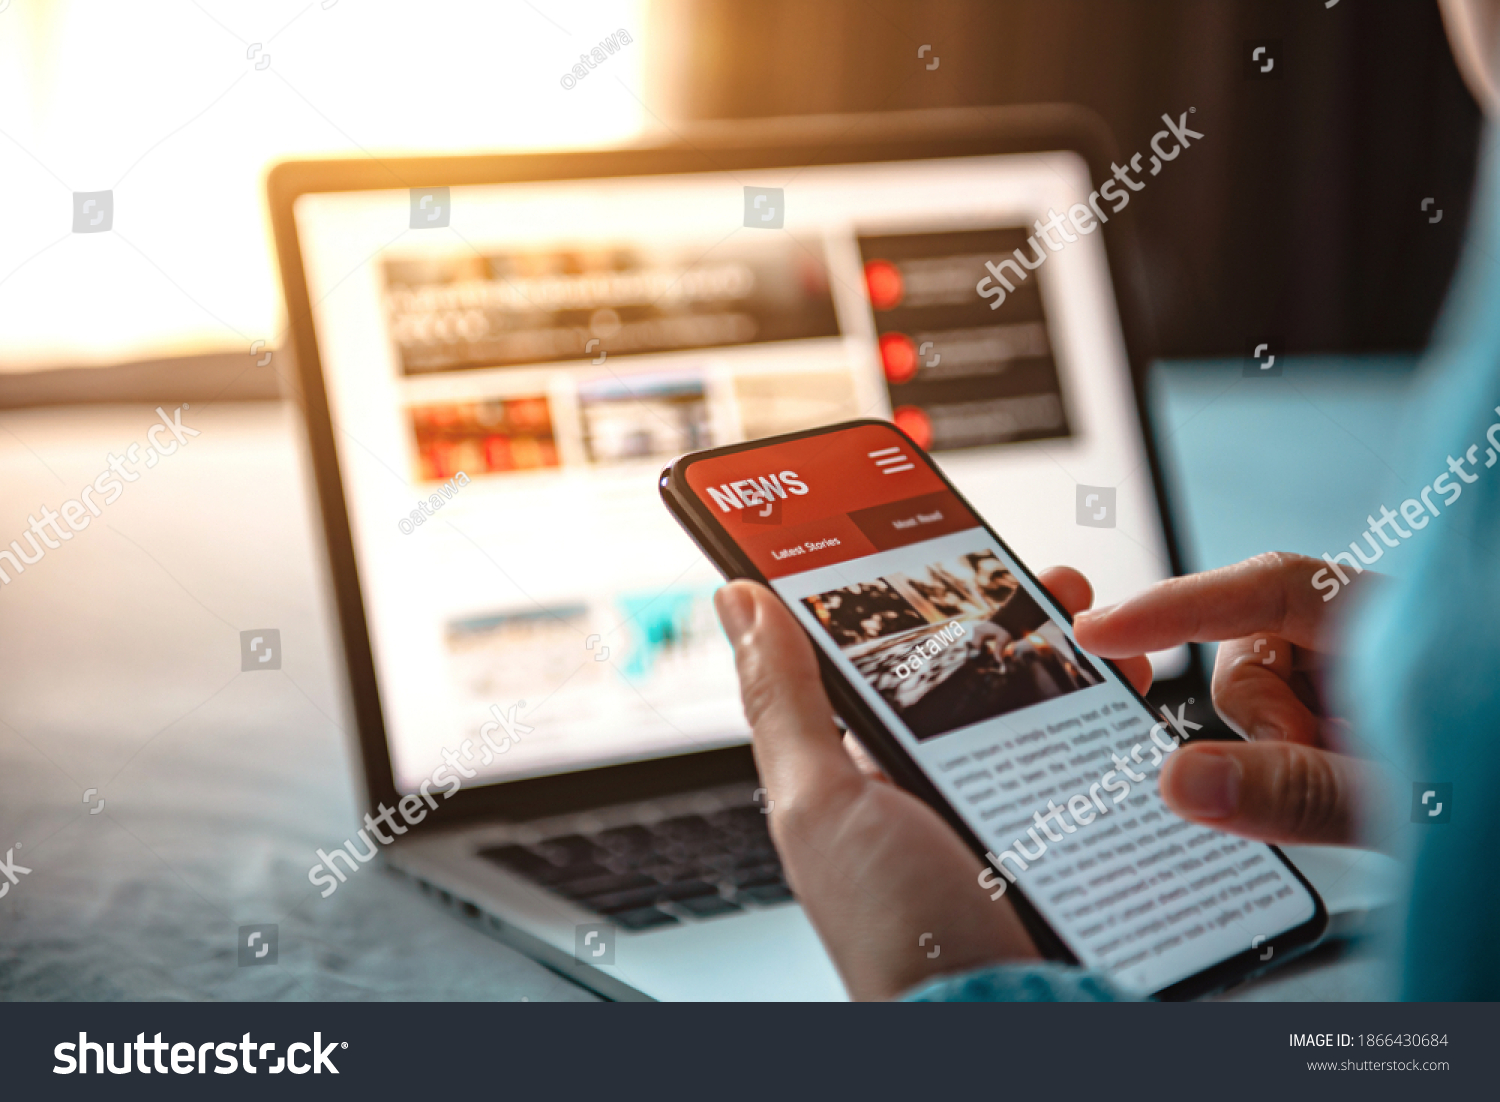 Online news on a smartphone. Mockup website. Woman reading news or articles in a mobile phone screen application at home. Newspaper and portal on internet. #1866430684